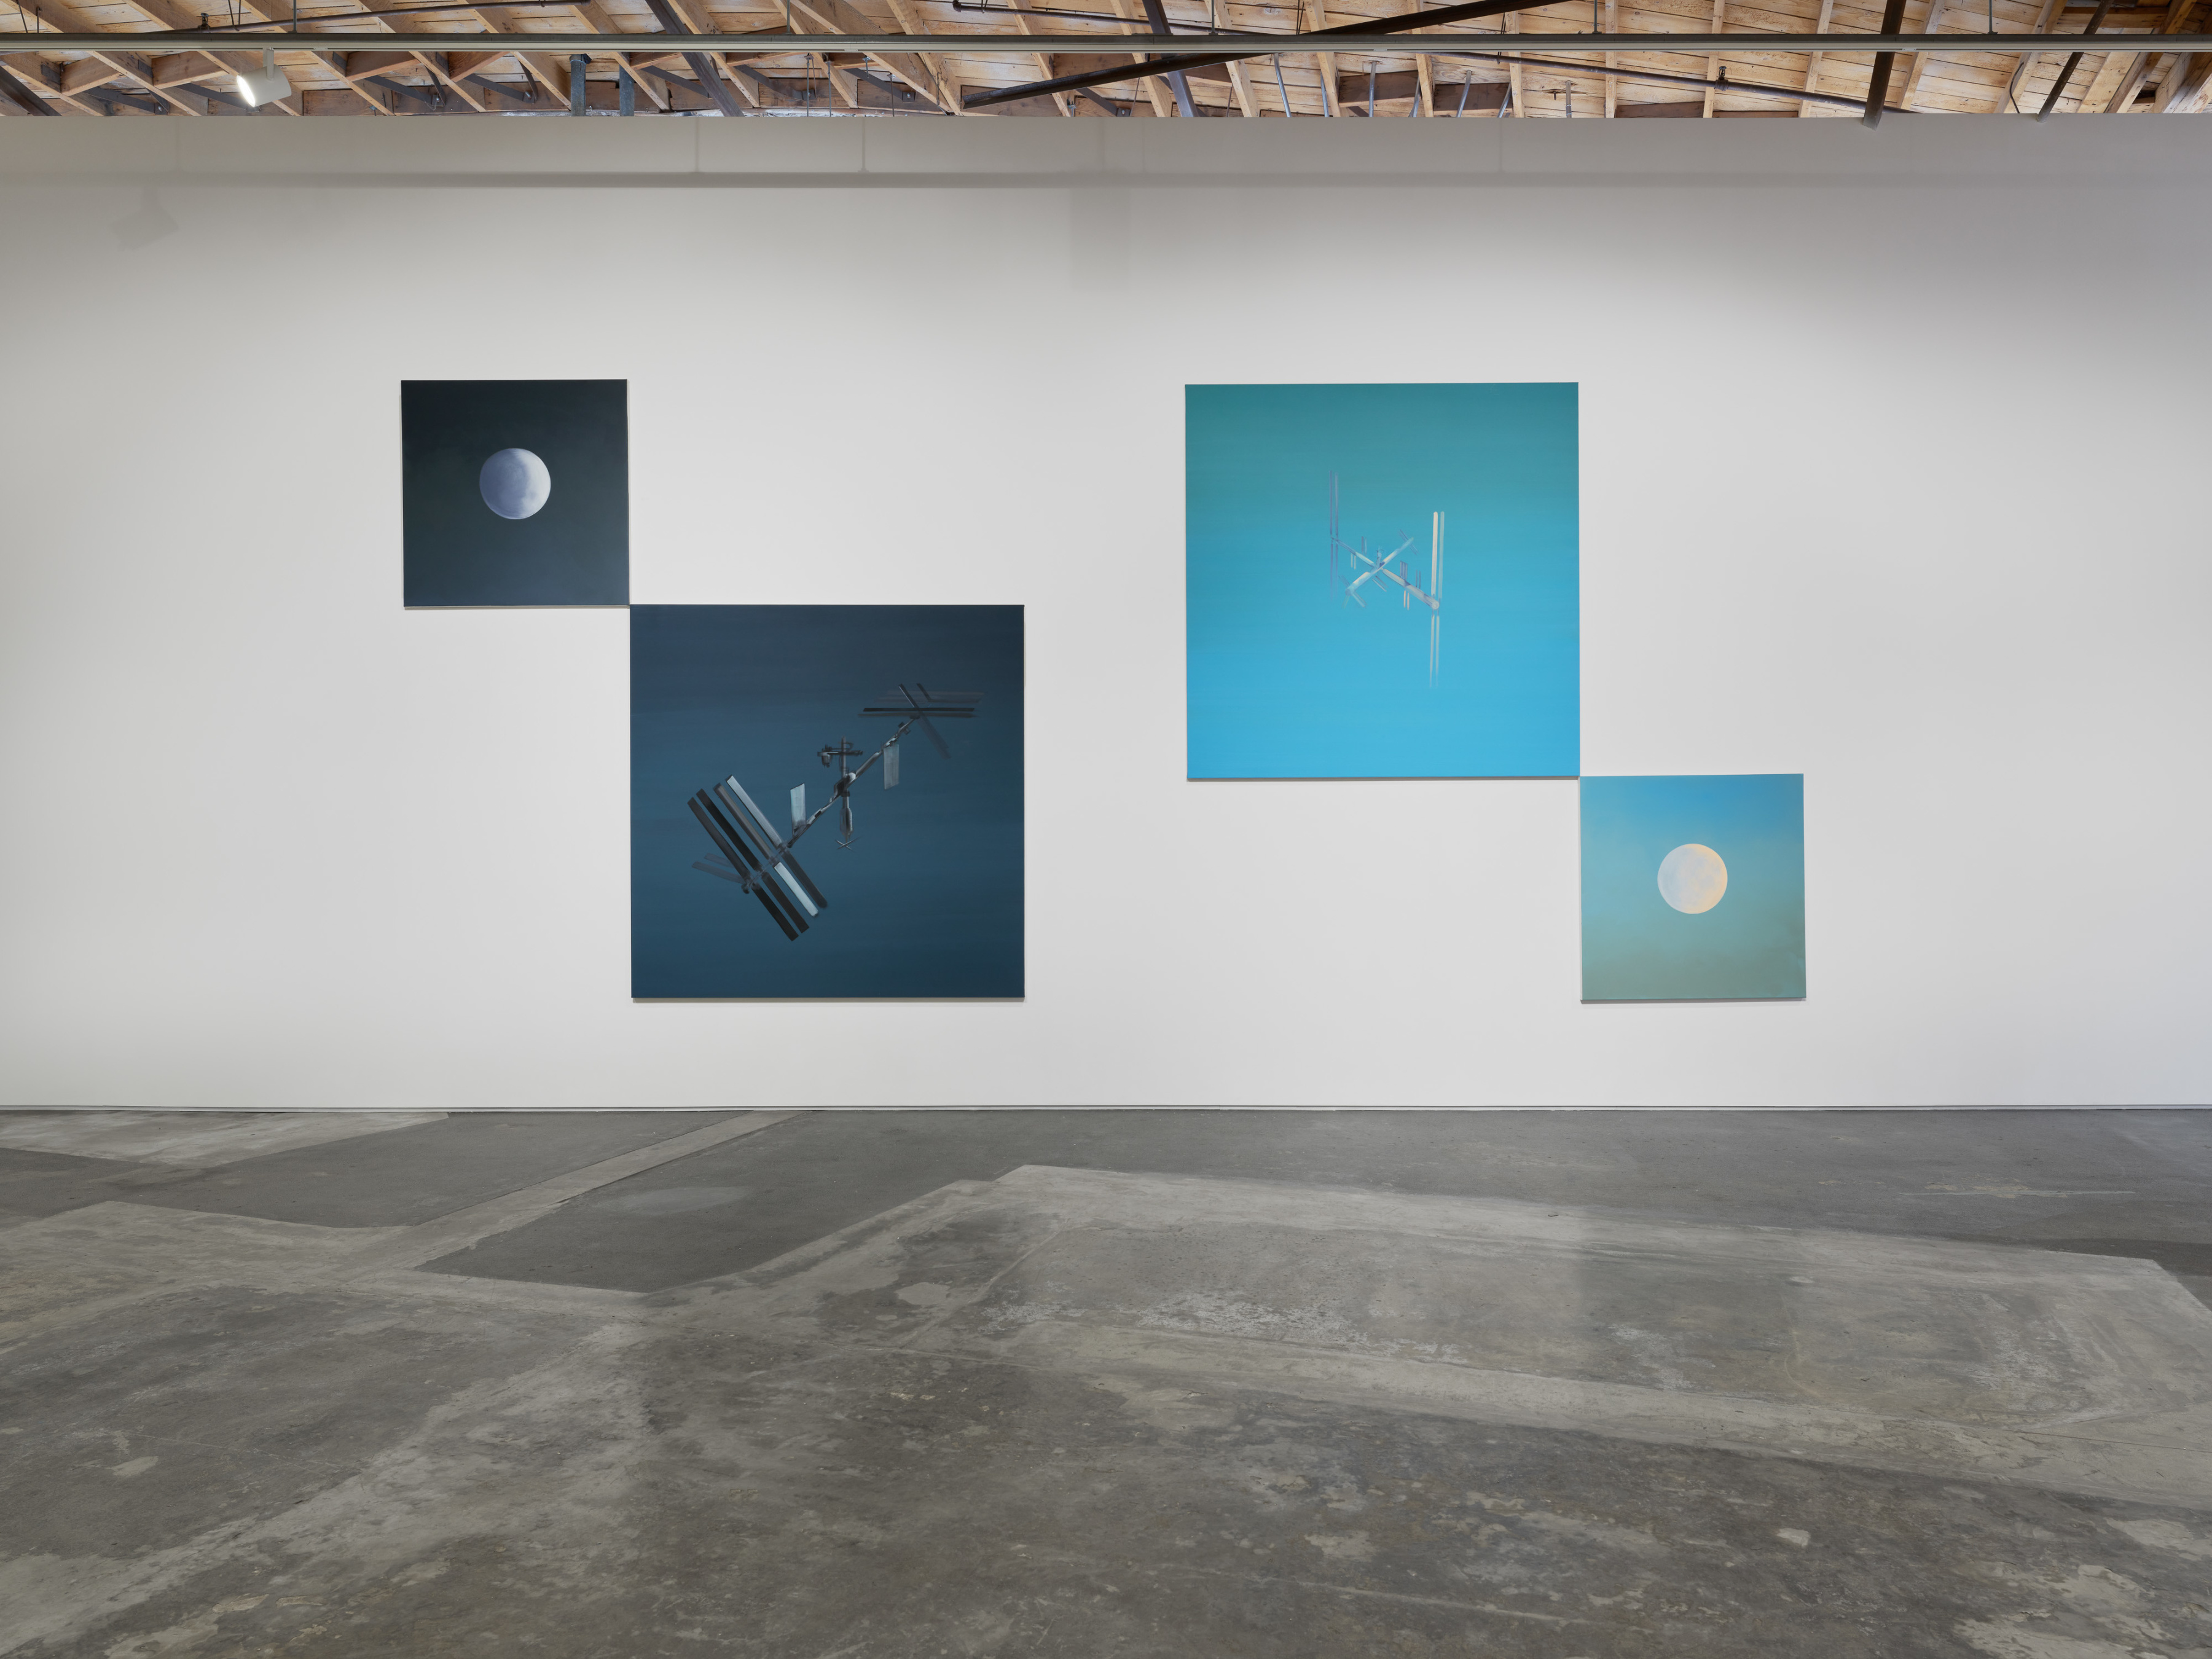 Installation view of Wanda Koop’s “Objects of Interest” at Night Gallery